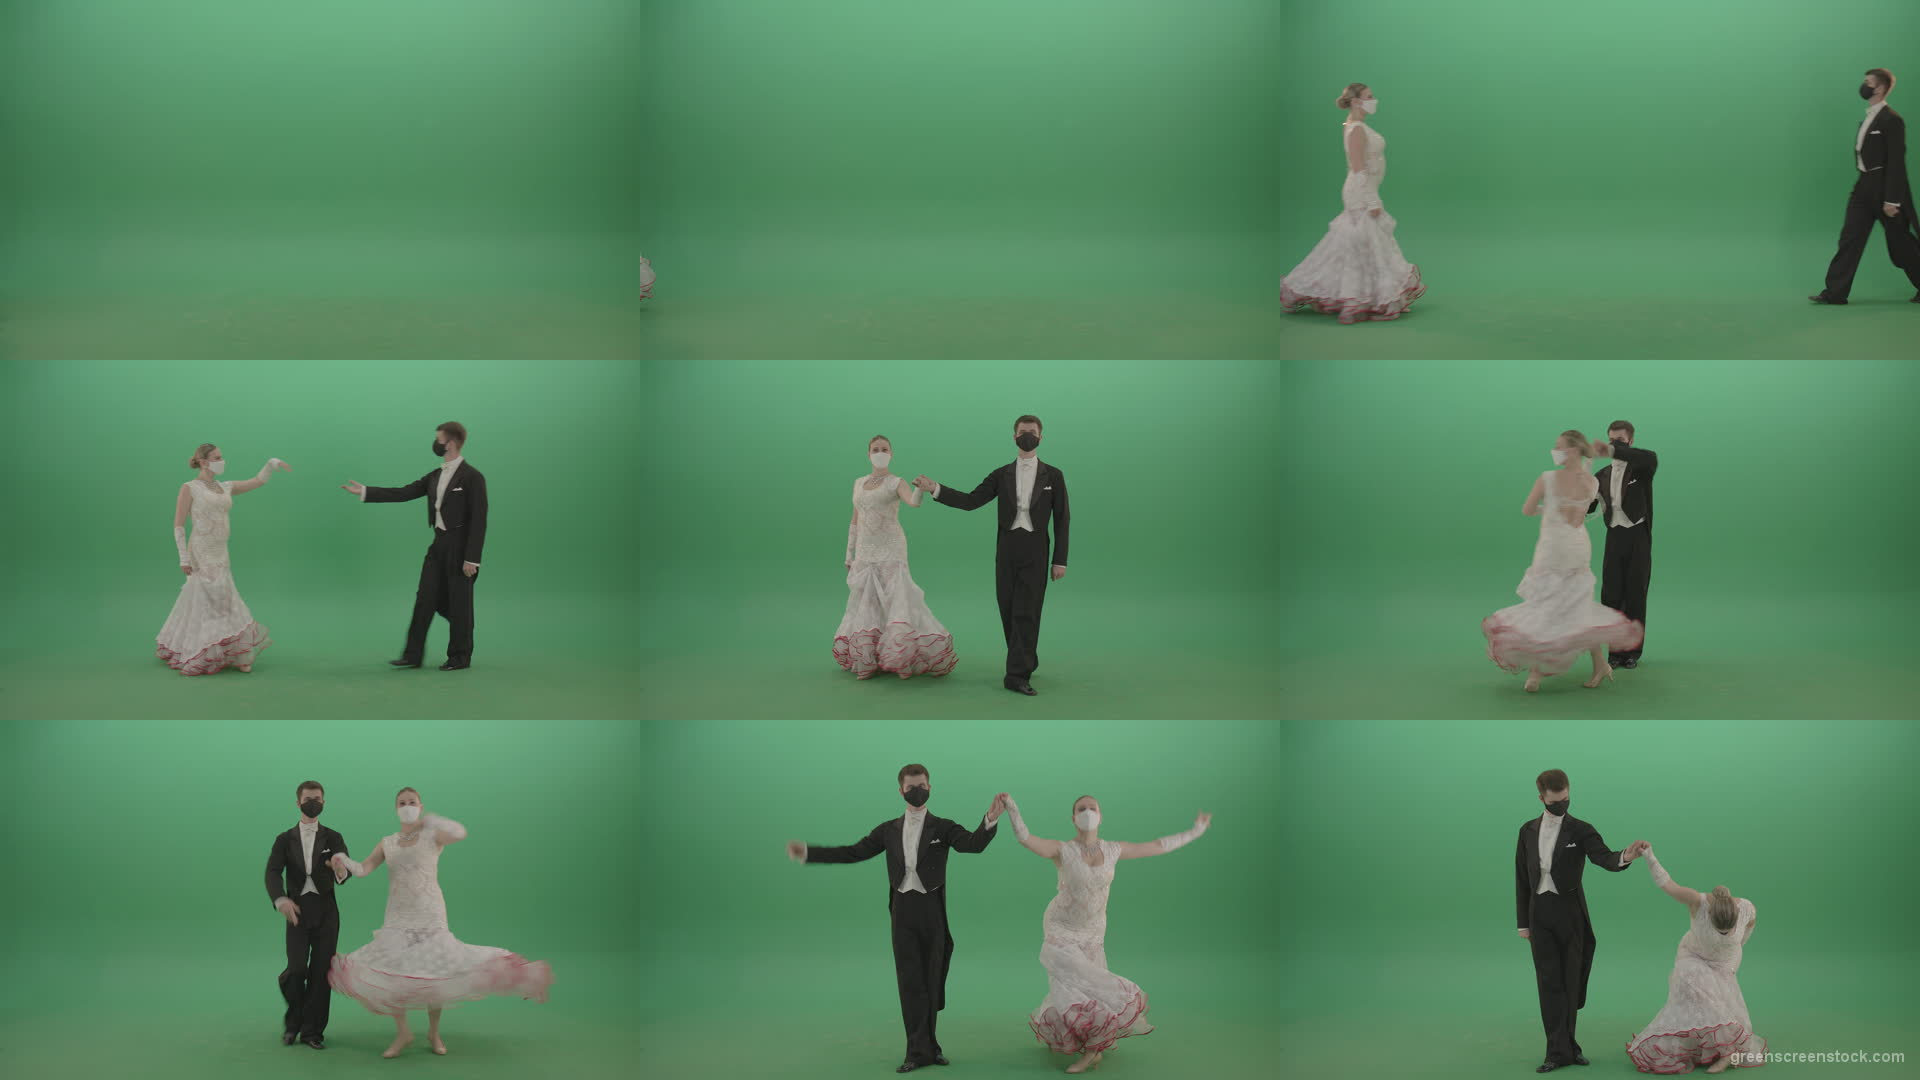 Ballroom-Dancers-Man-and-Woman-making-bowing-regards-and-welcome-Corona-Virus-on-green-screen-4K-Video-Footage-1920 Green Screen Stock